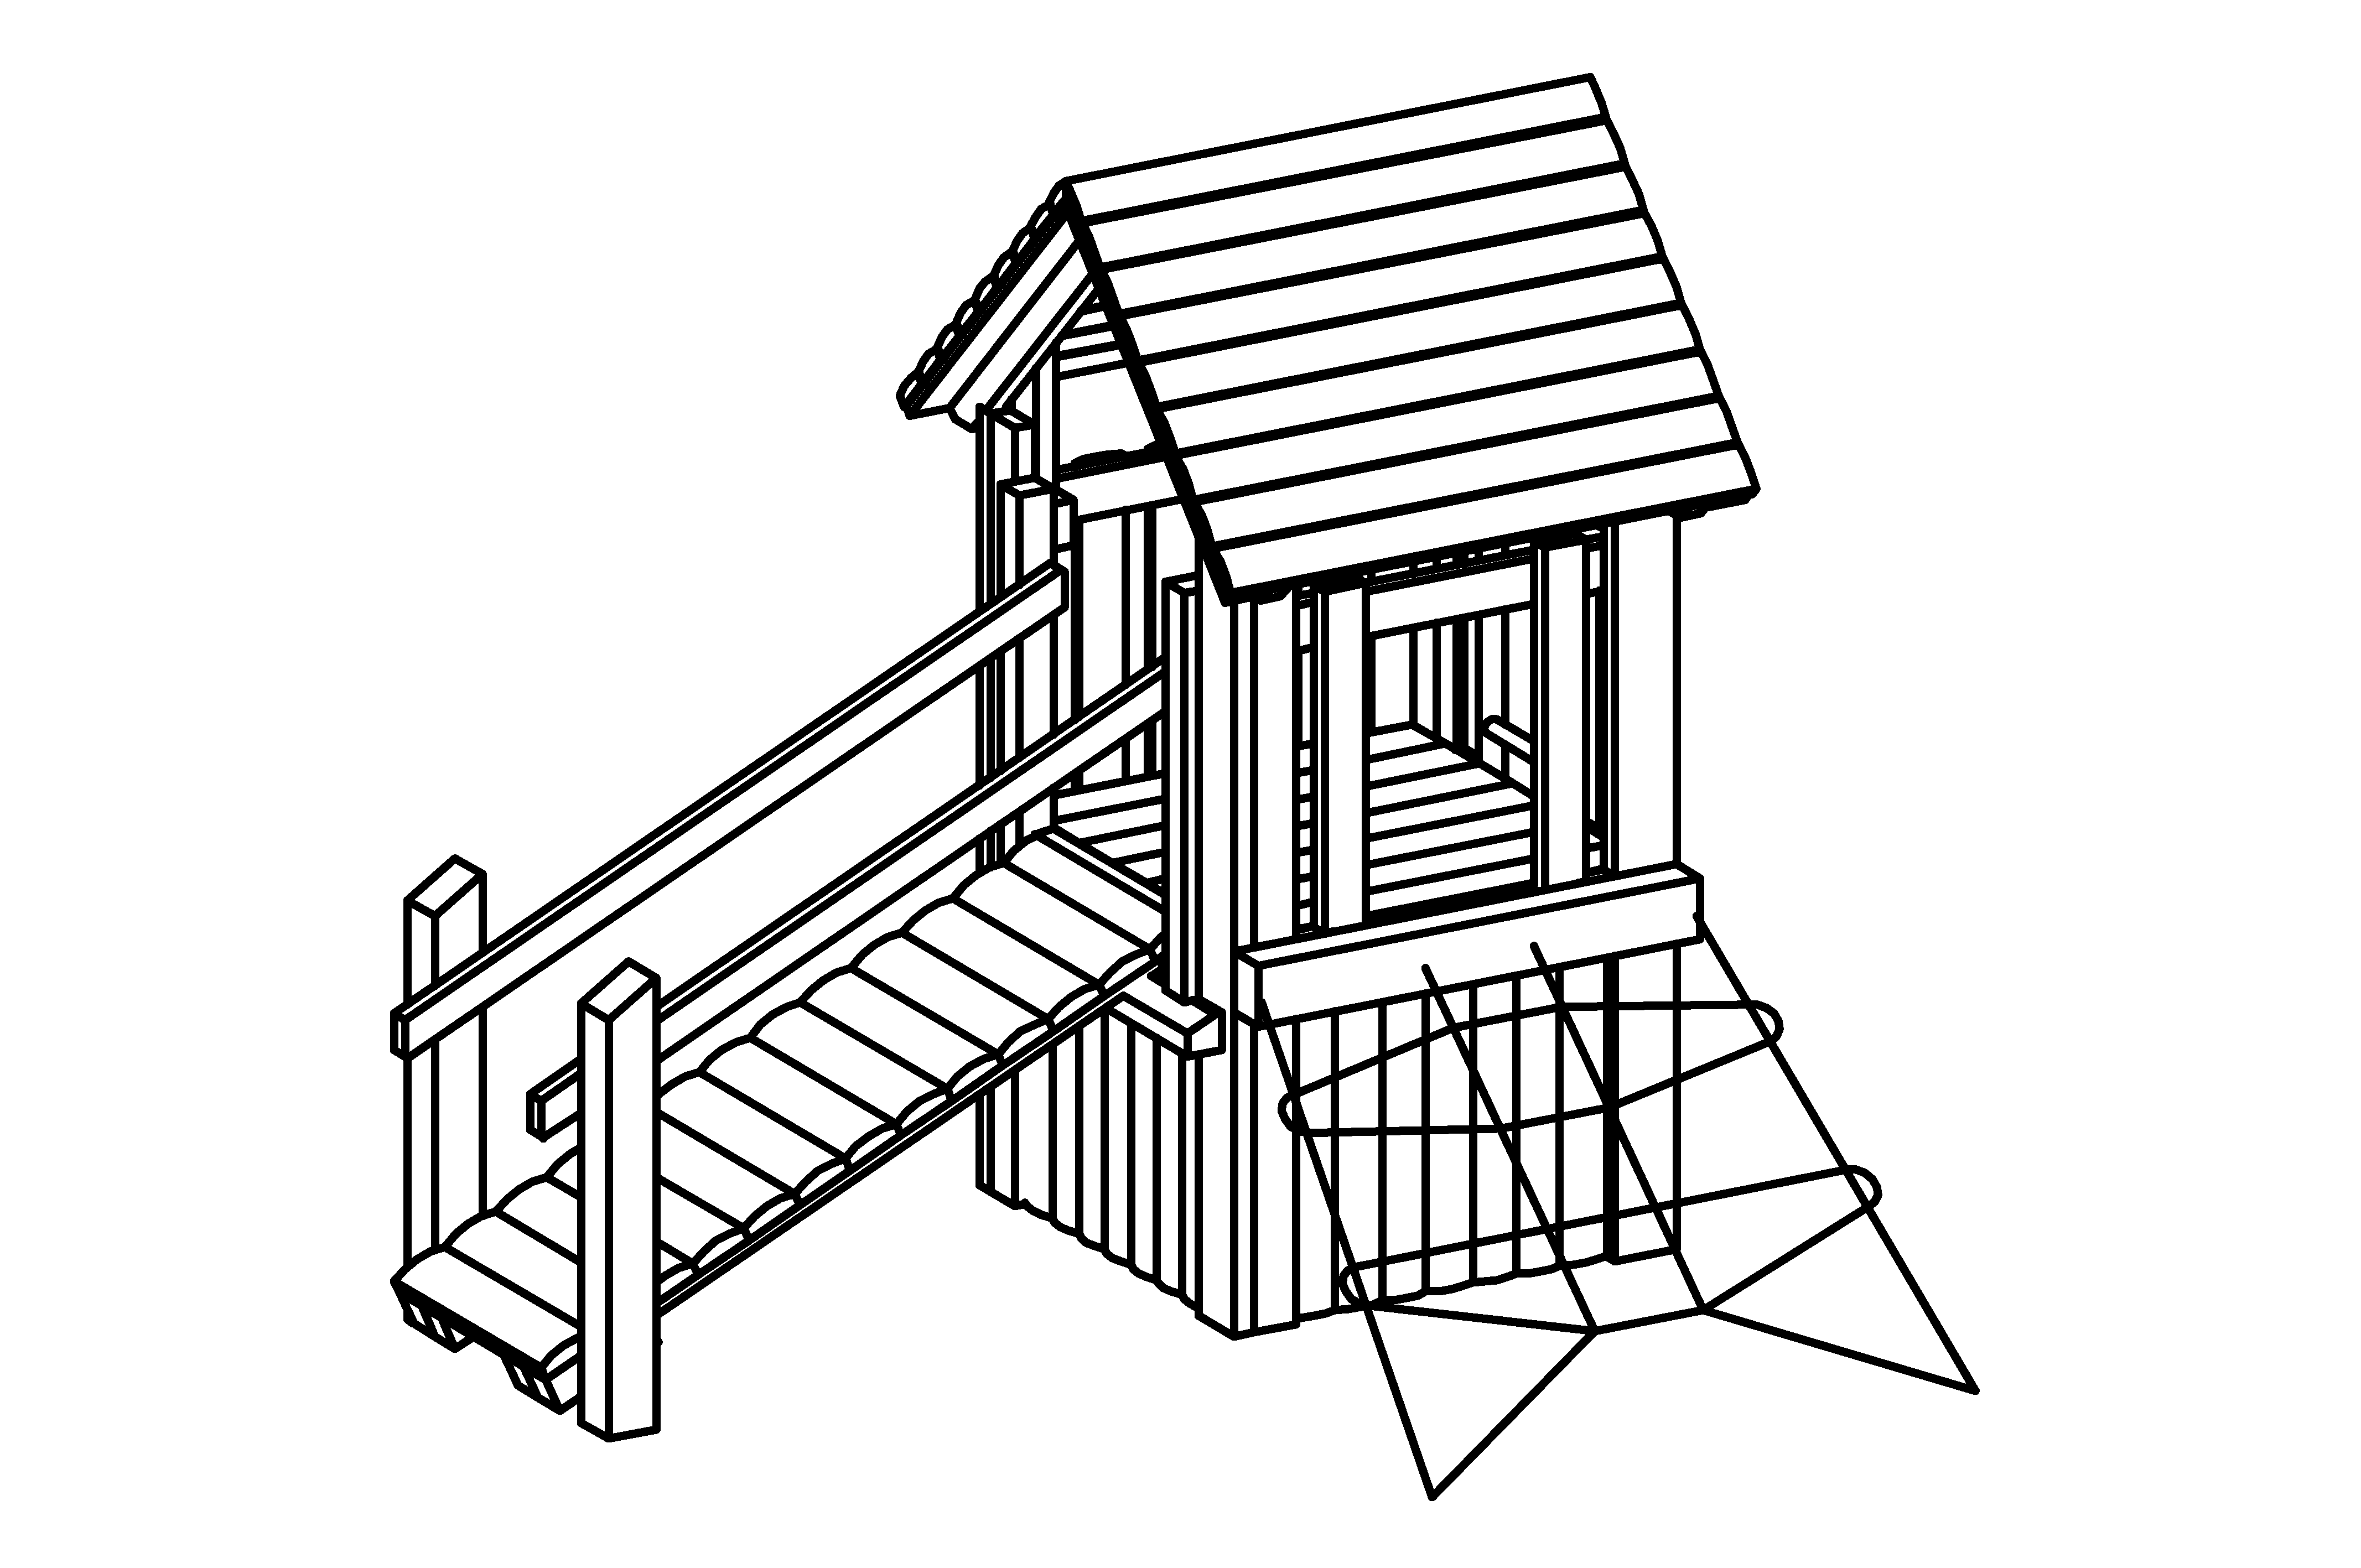 Hut Combination 214 is a small platform hut with roof and steel feet